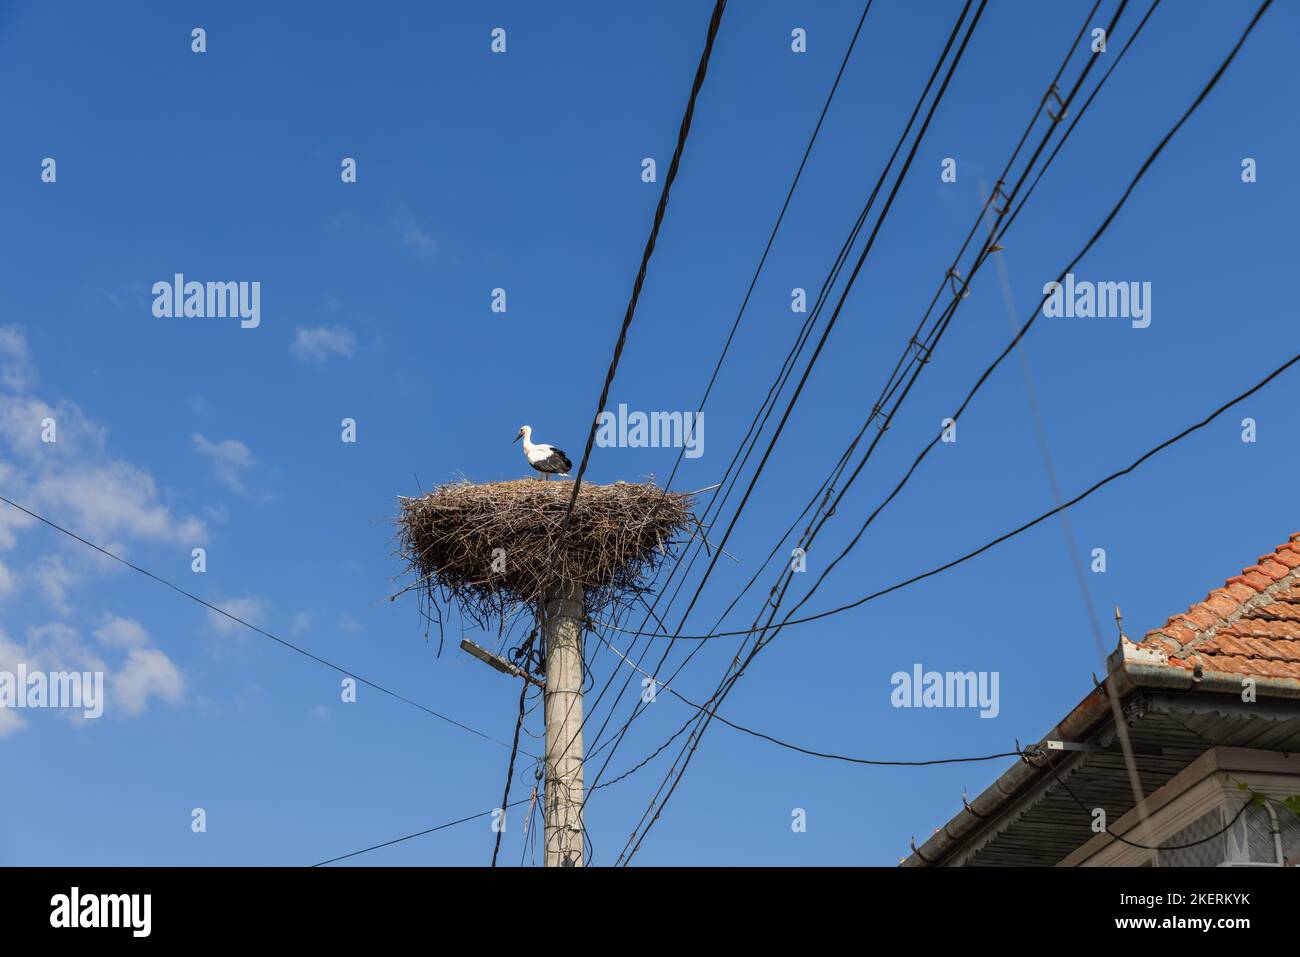 A stork (Ciconia ciconia) stands inside a carefully constructed nest on a lighting pole wrapped in multiple electrical wires next to the building's ti Stock Photo